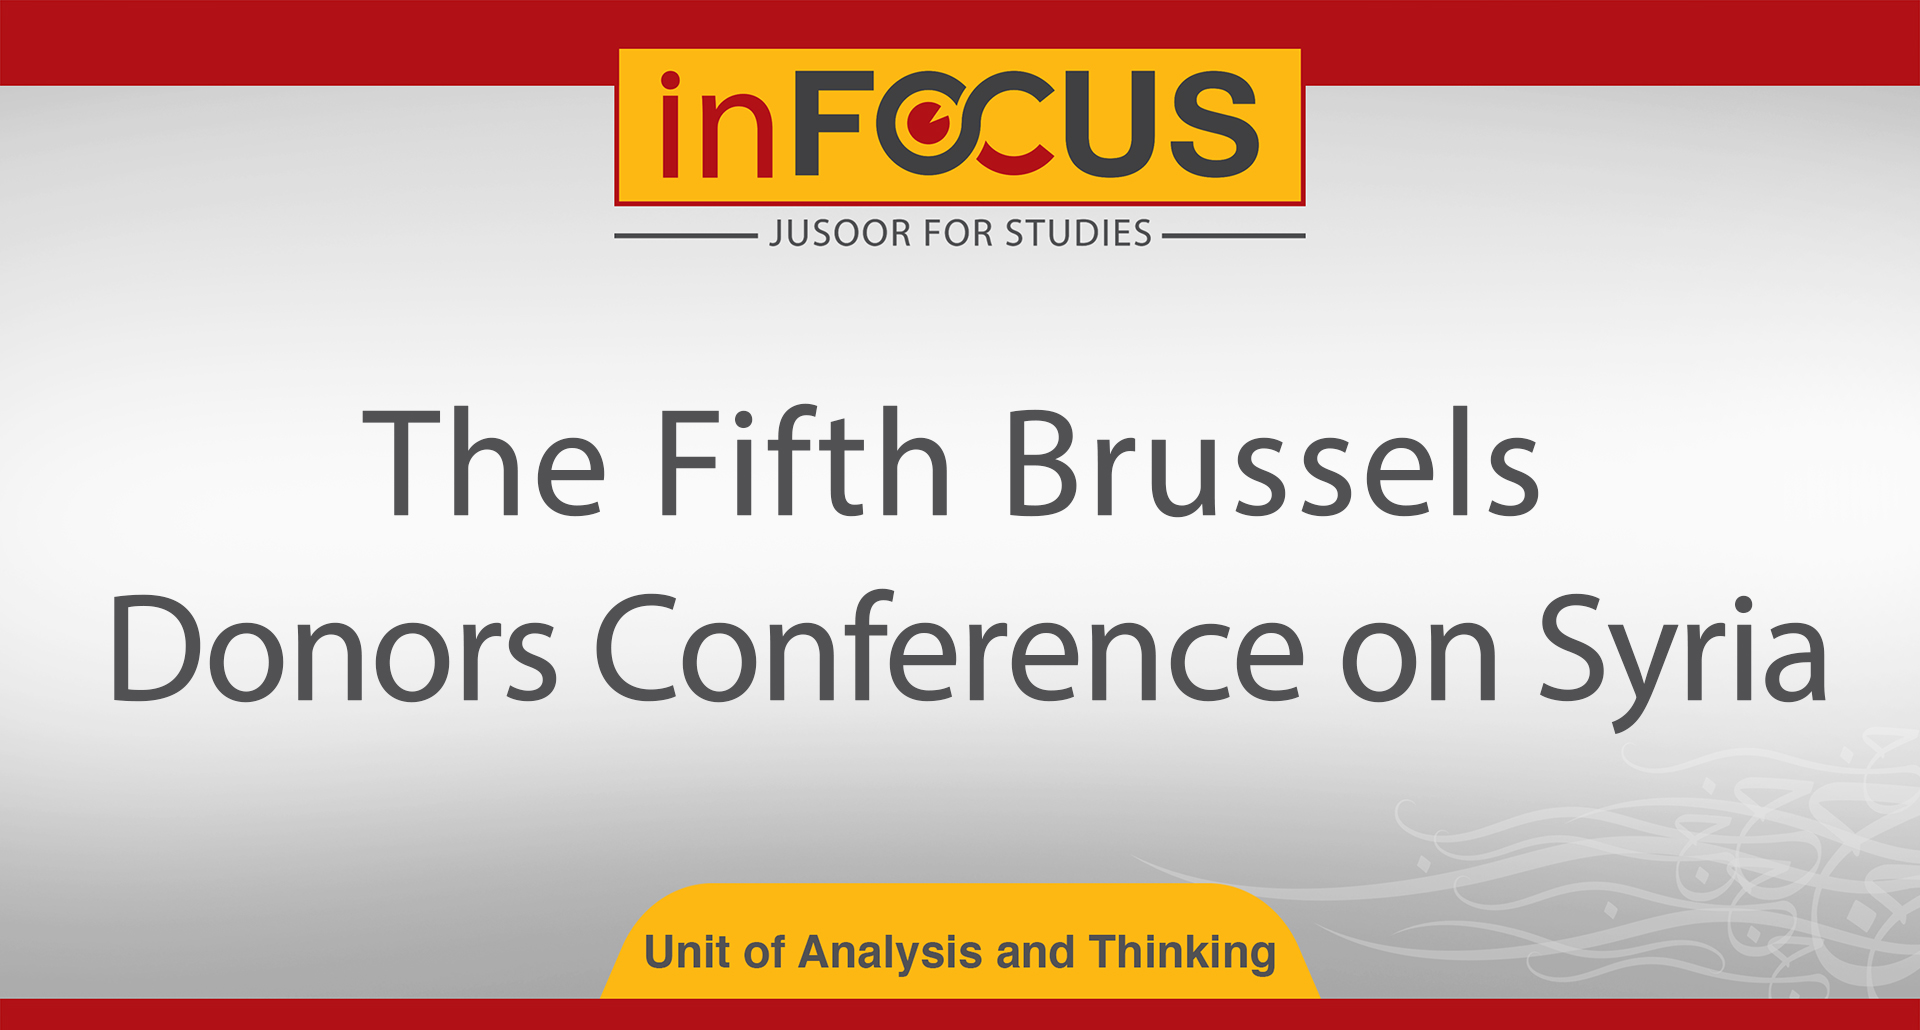 The Fifth Brussels Donors Conference on Syria